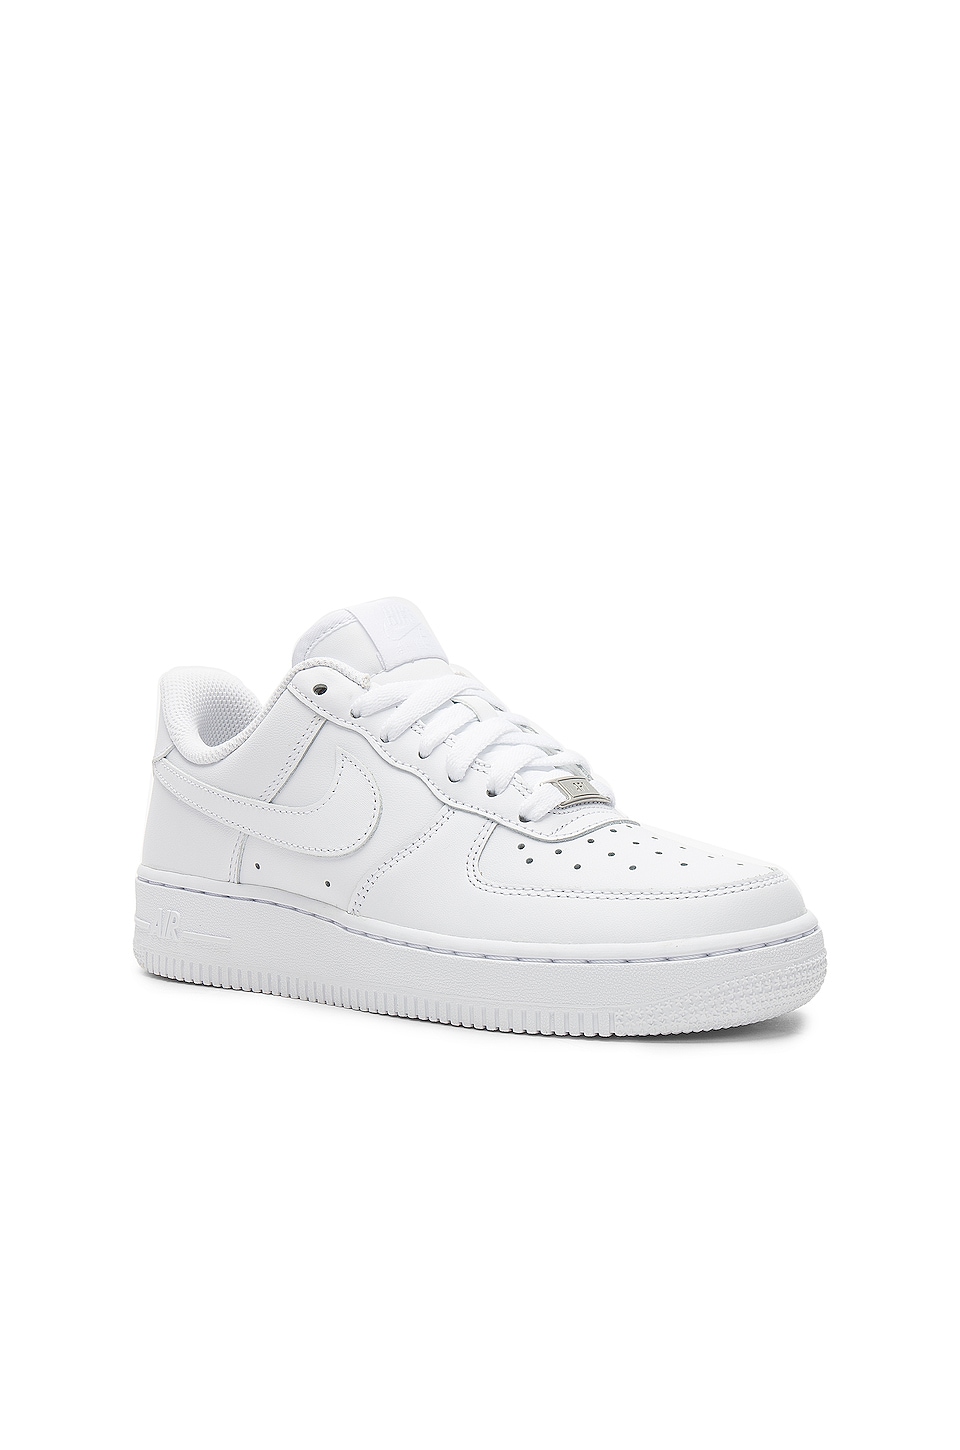 Nike Air Force 1 07 LV8 What The La Sneakers - Farfetch